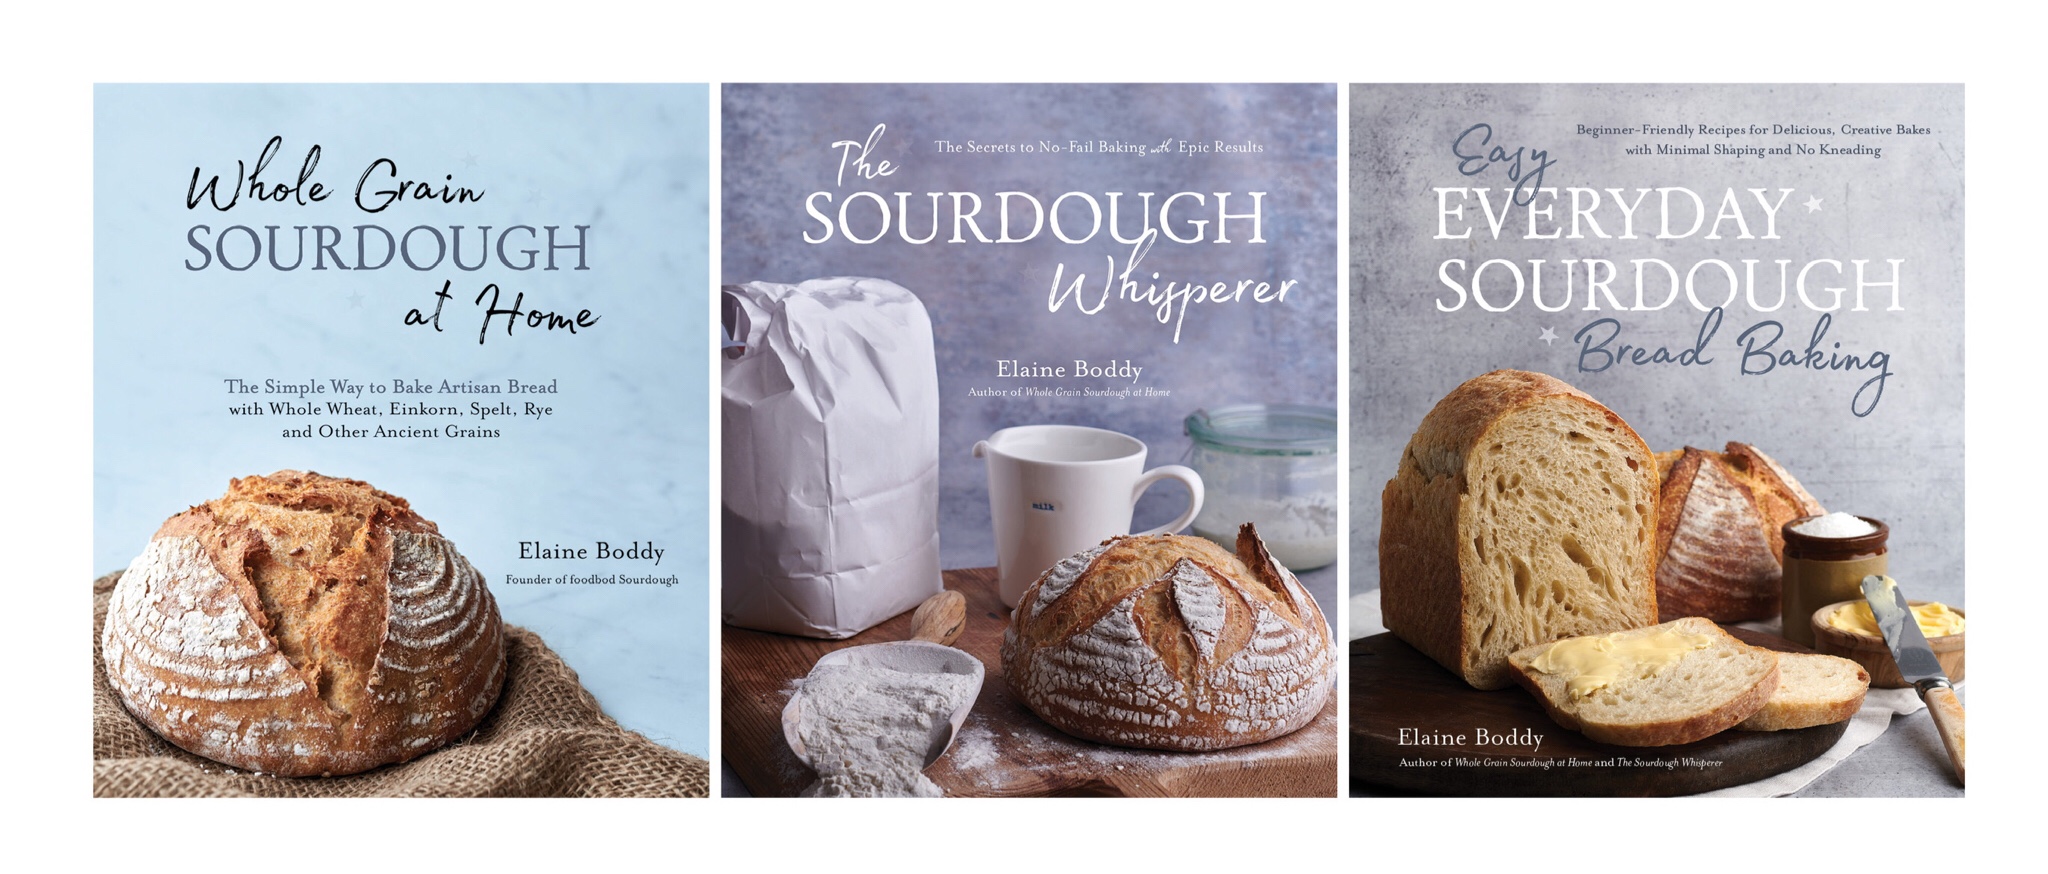 Selling Sourdough Bread: How To Set Up a Sourdough Bakery at Home